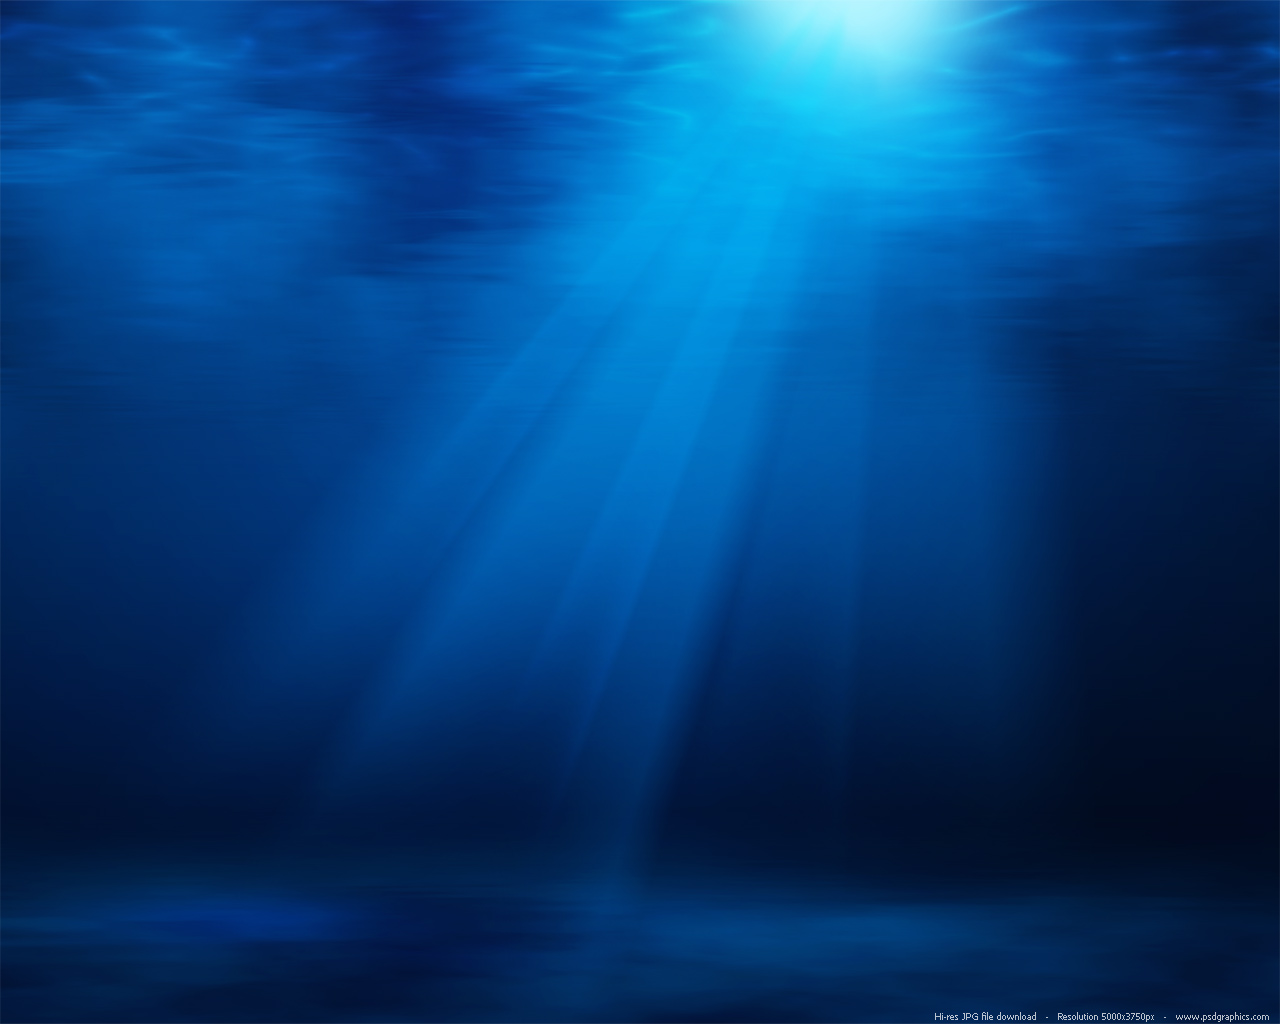 Blue Underwater With Sun Rays Background Psdgraphics